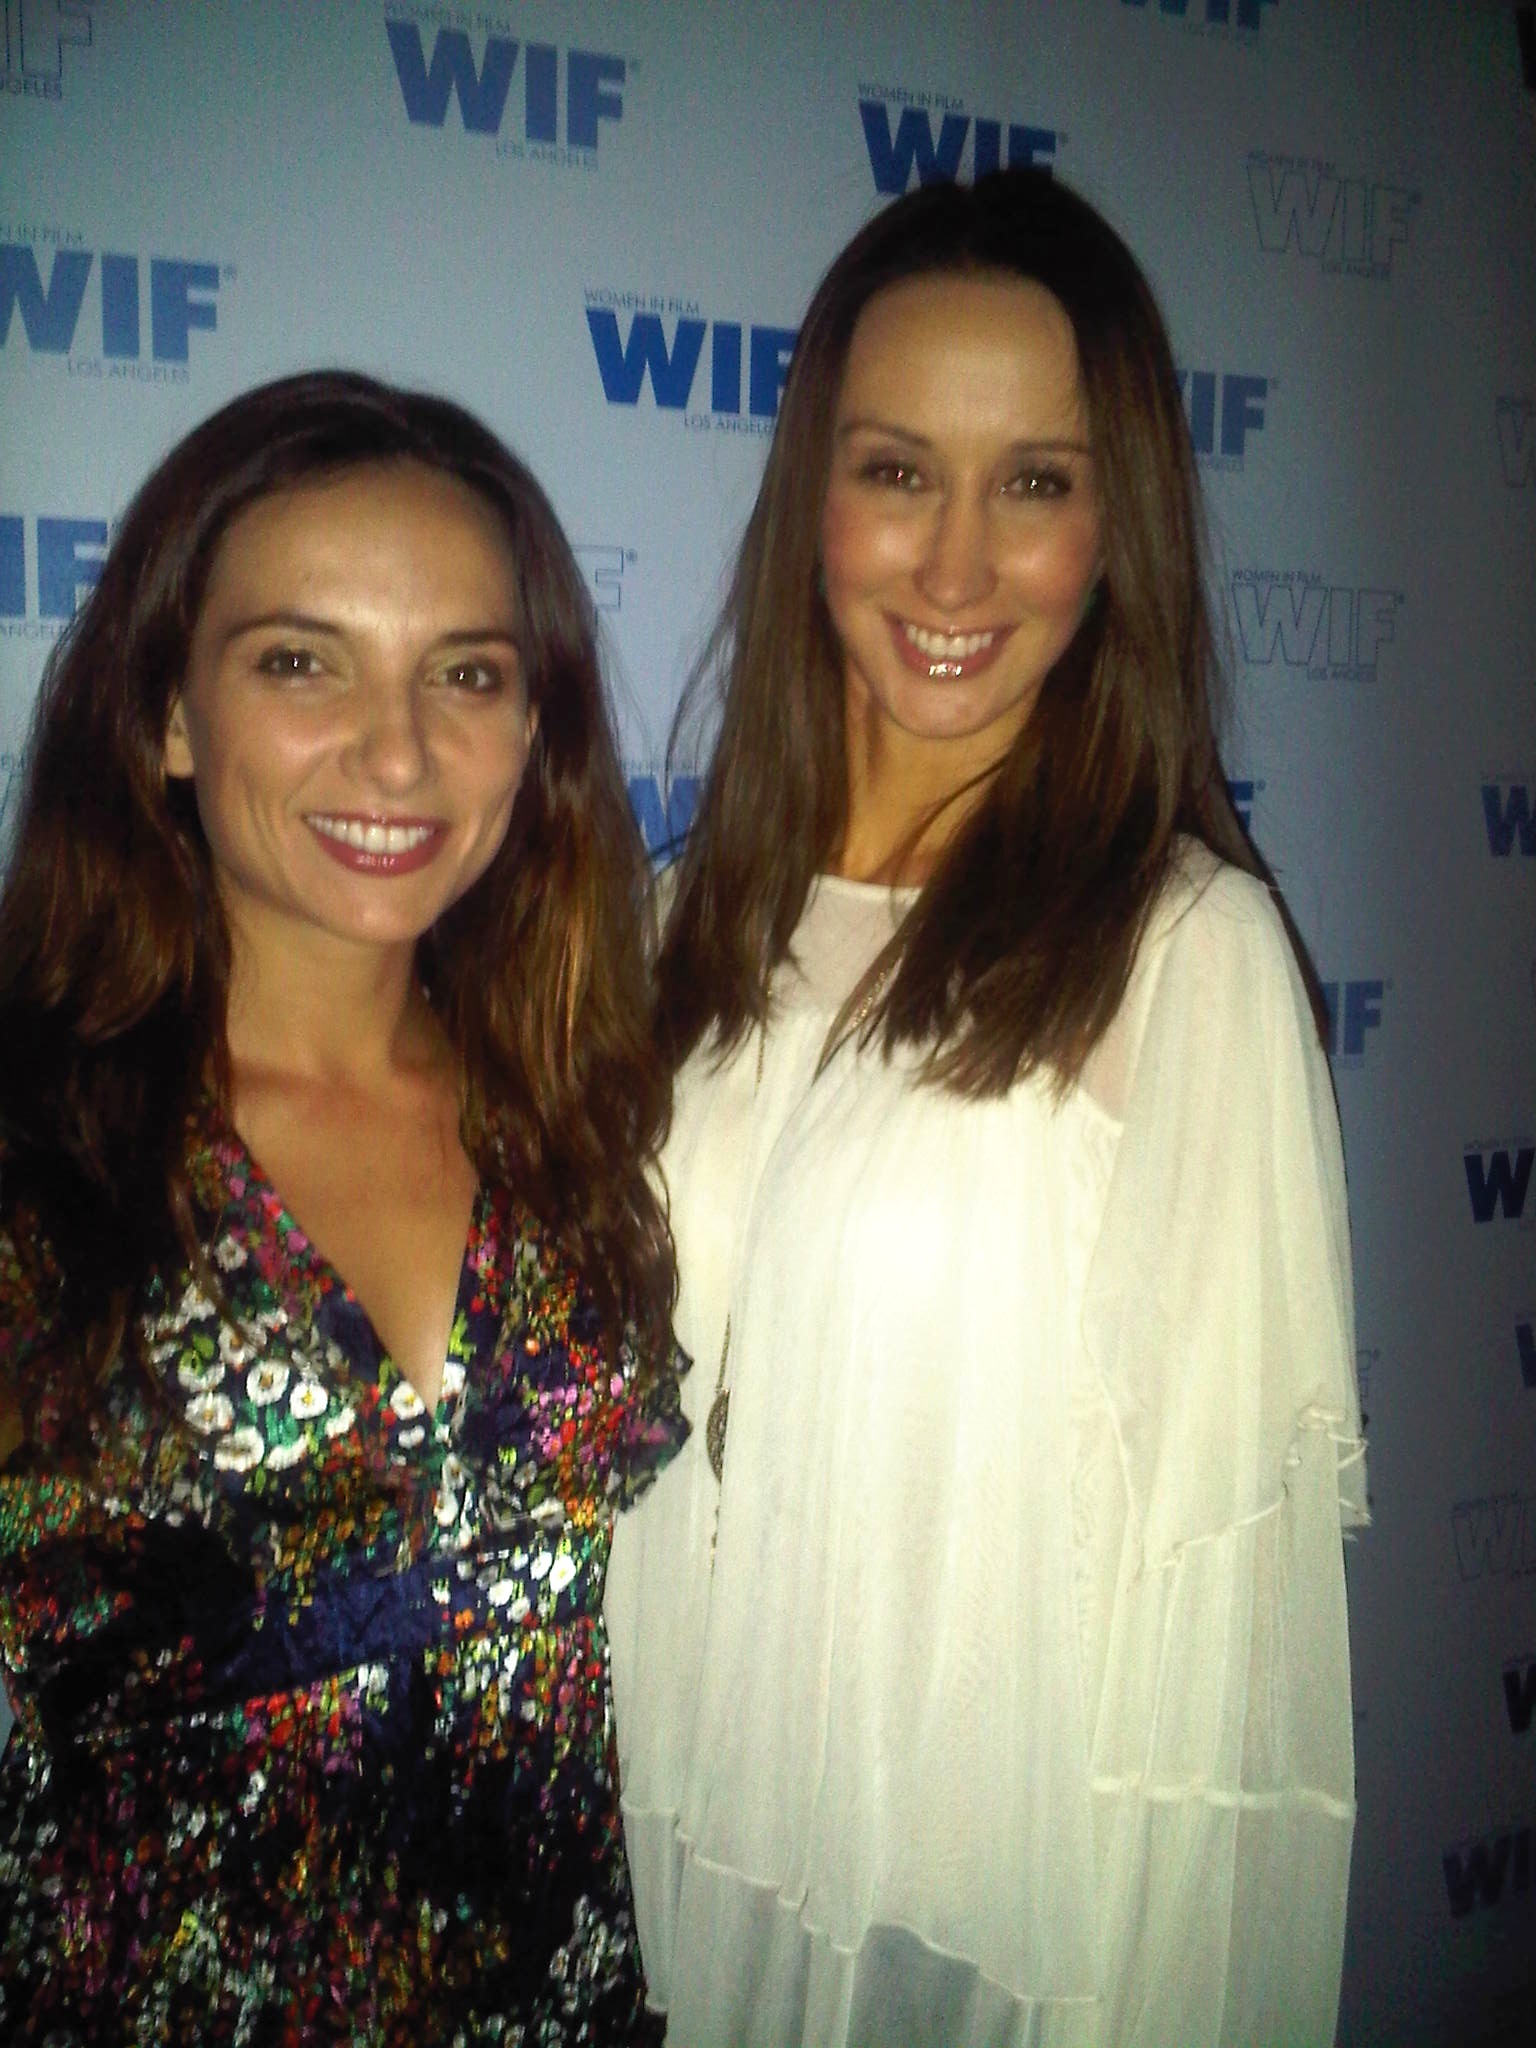 Actresses Nadia Jordan and Leila Birch at Women In Film party - Capital Grille Los Angeles